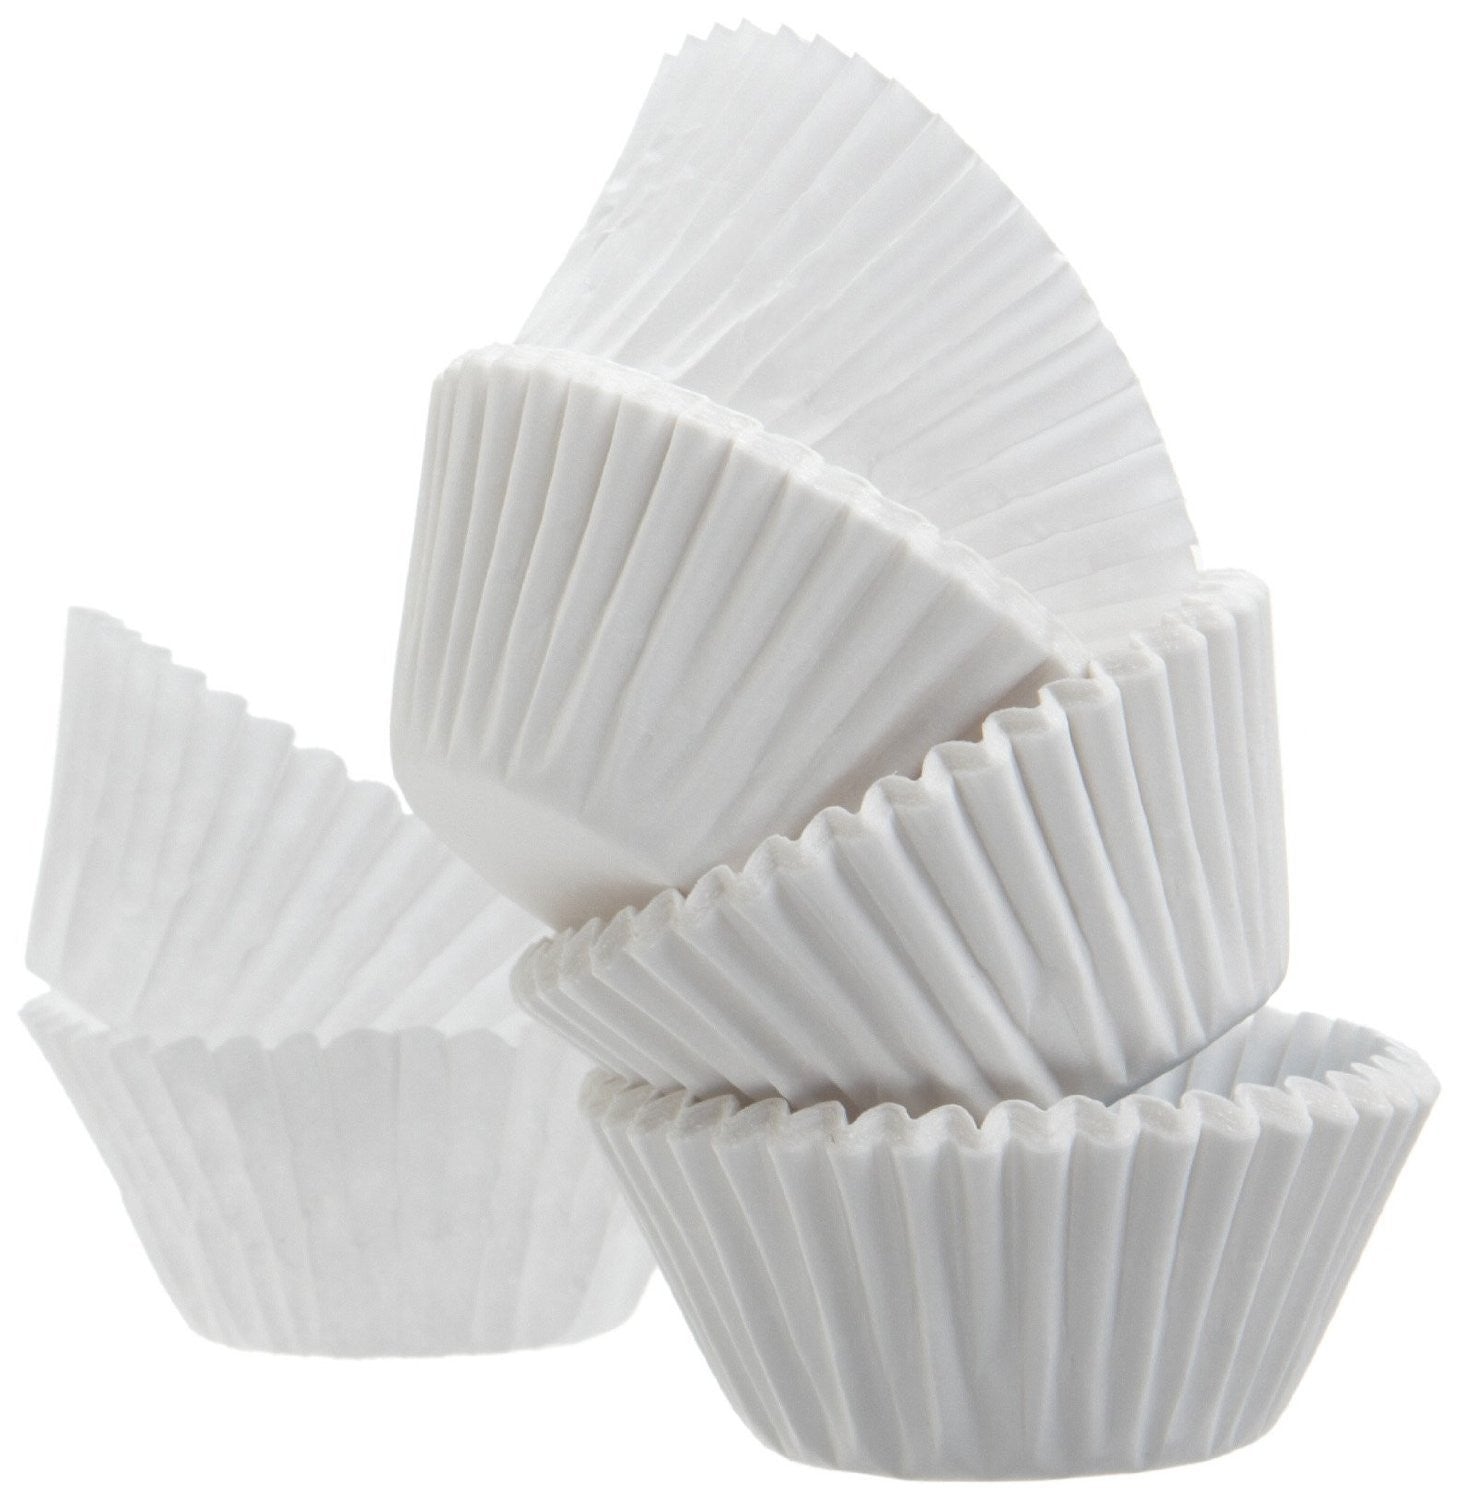 Muffin Paper Cup - White